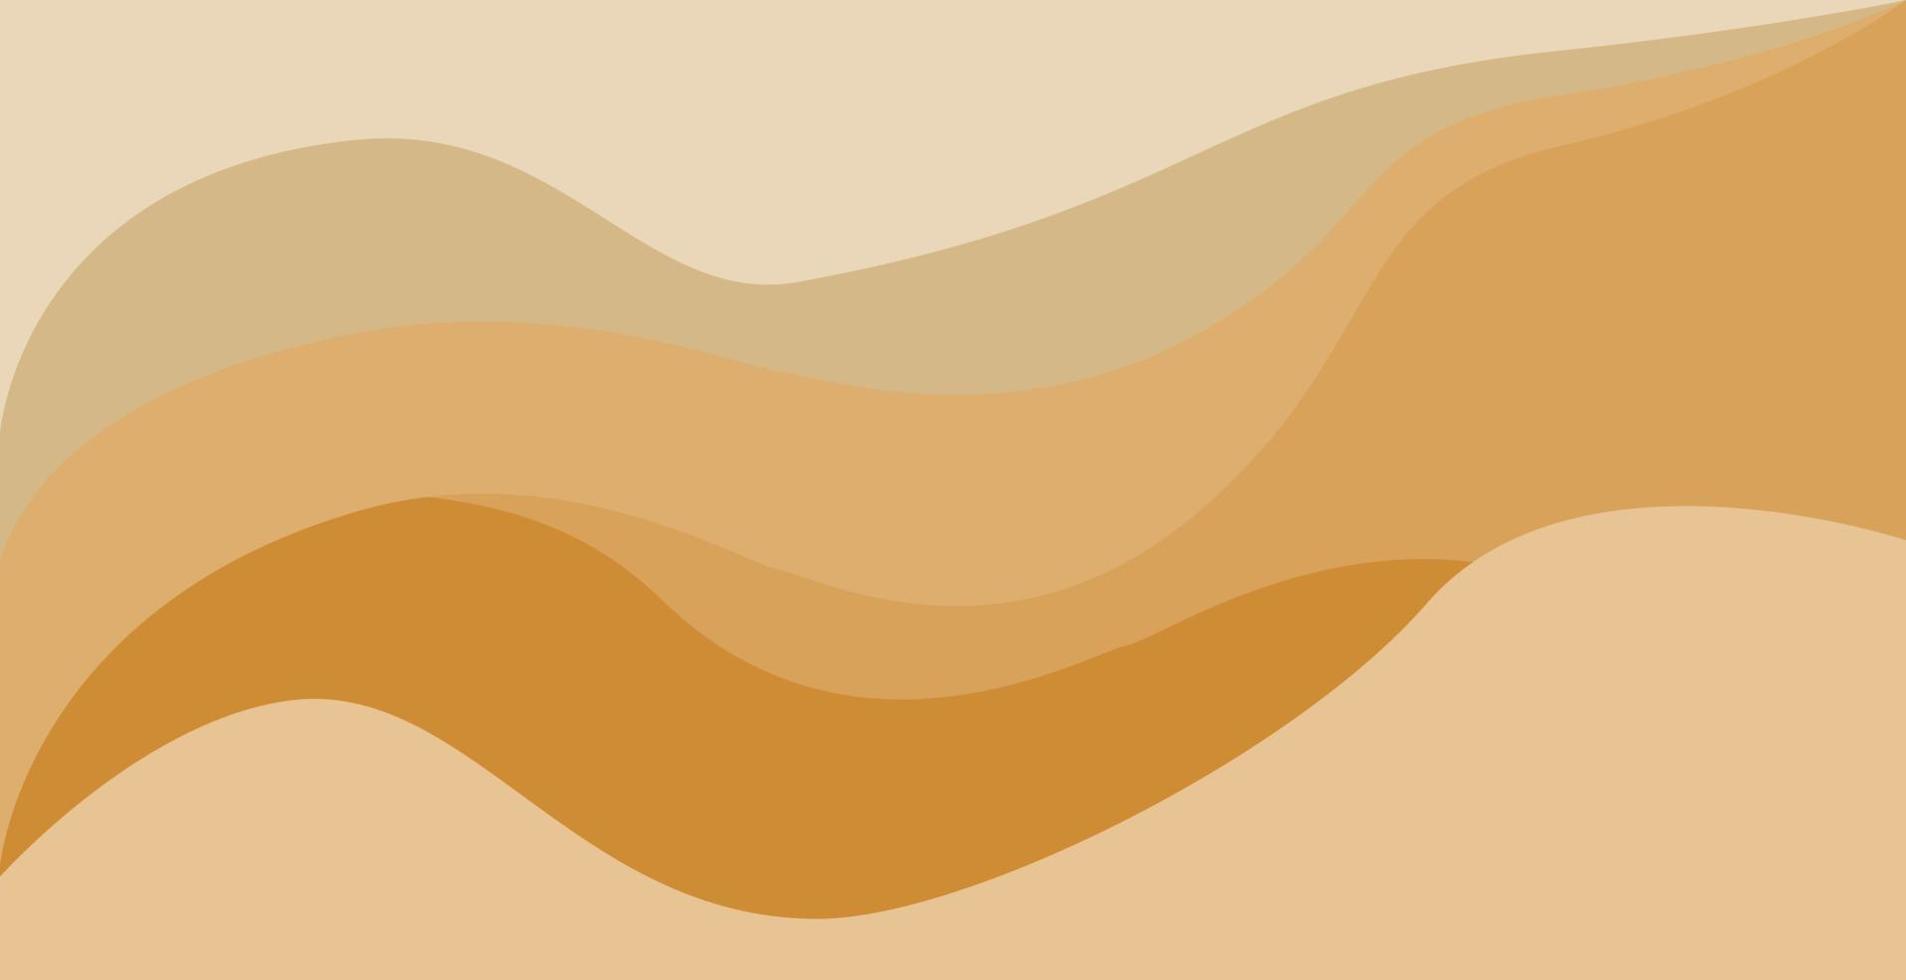 Brown shade abstract geometric background with waves. vector